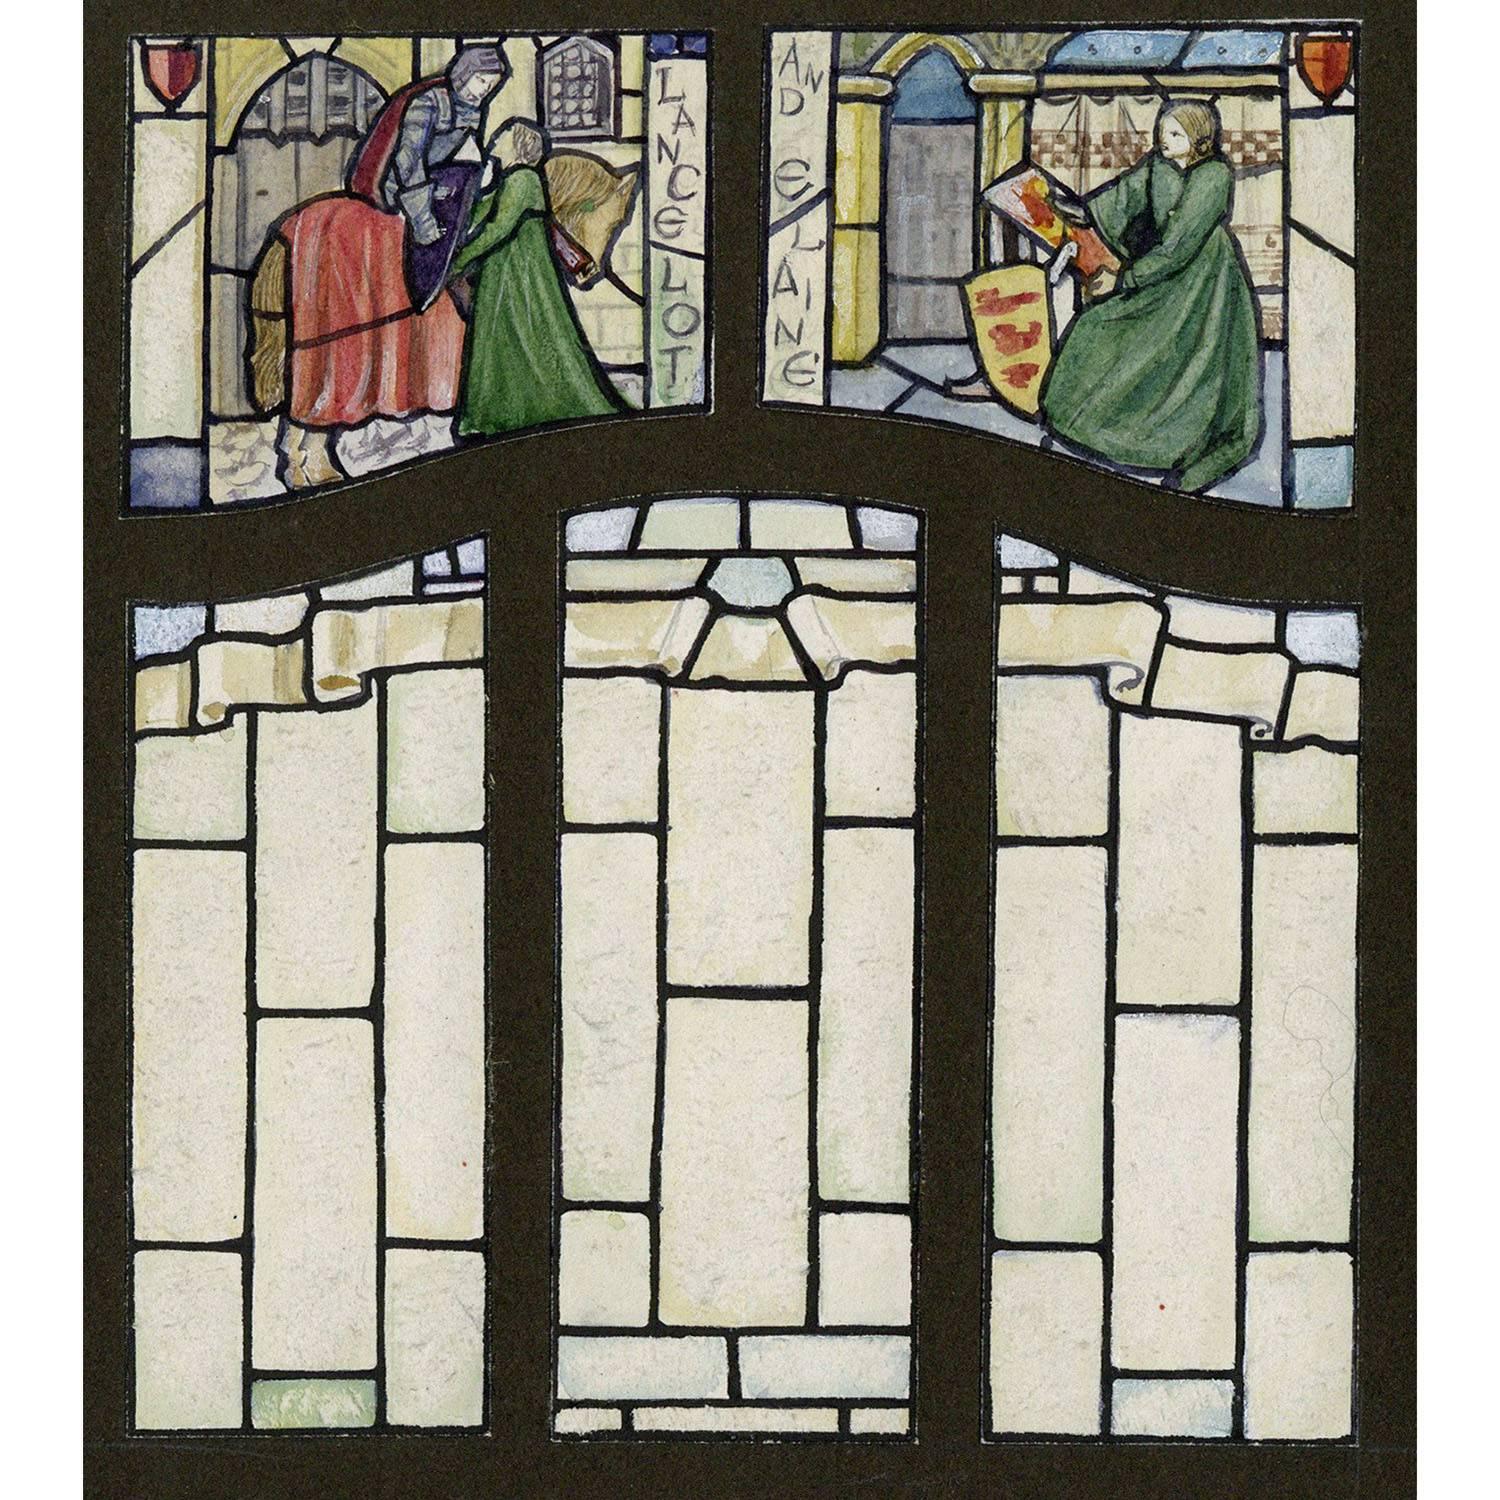 Sir Lancelot and Elaine  Arthurian Stained Glass Window Design For TW Camm 